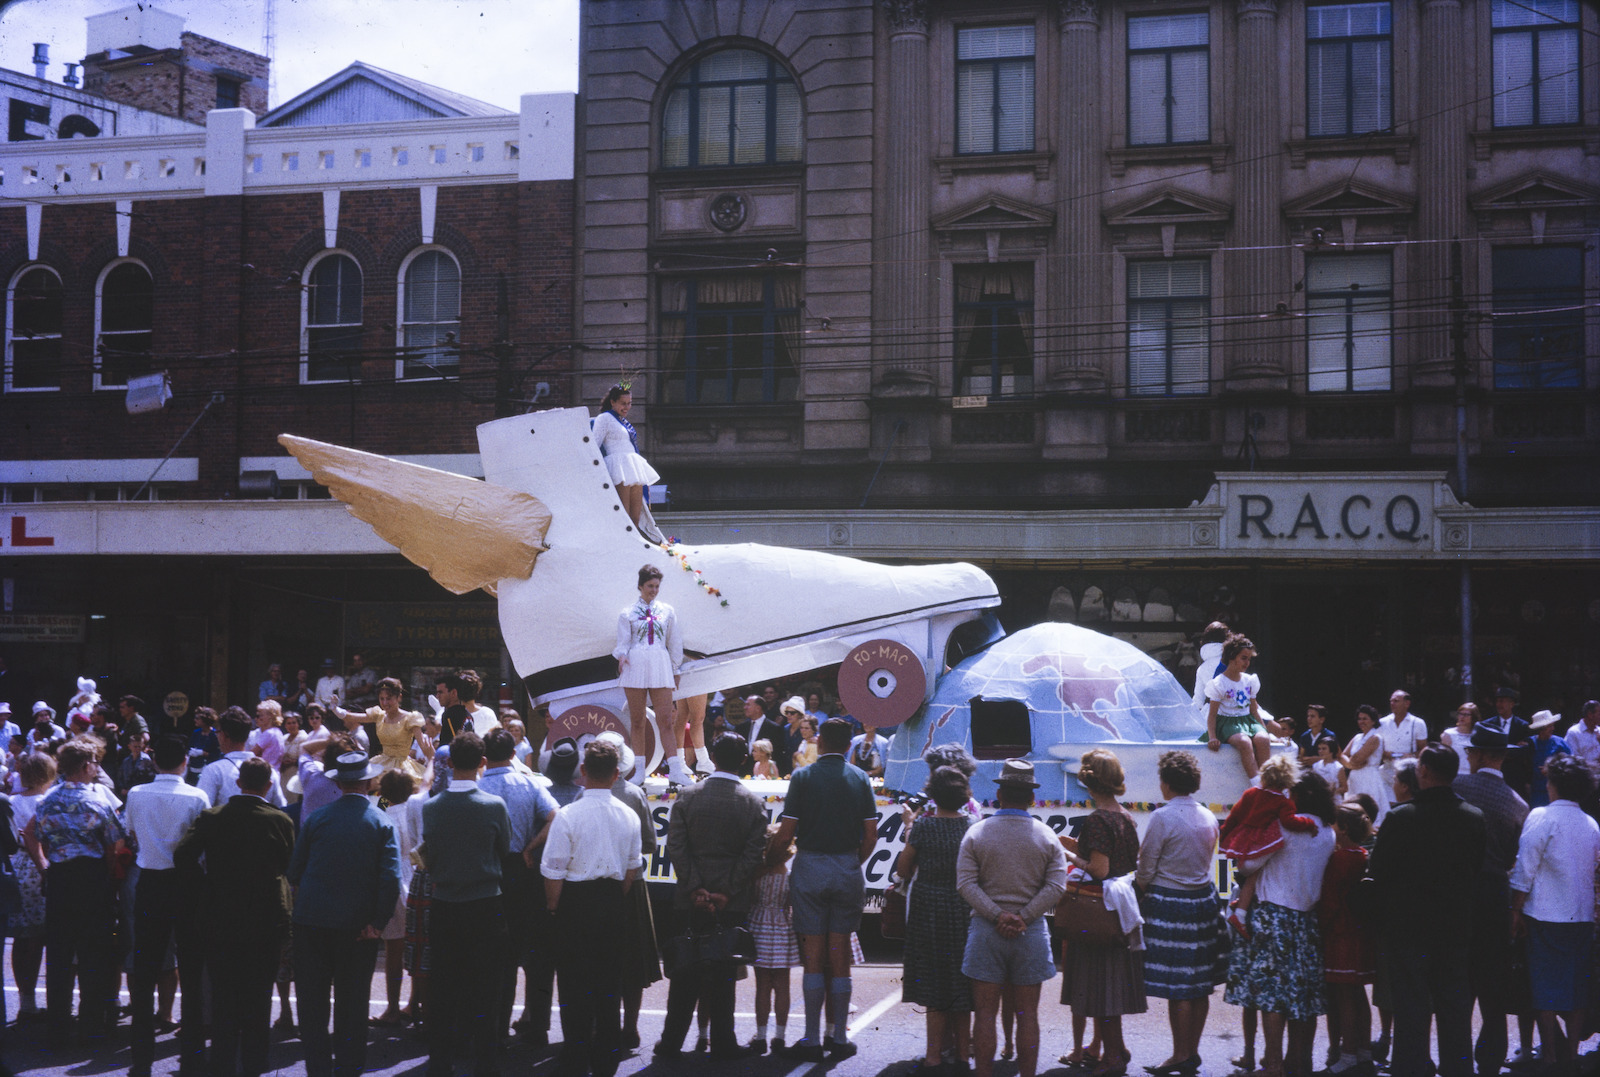 Parade float in the shape of a winged roller skate taking part in the Warana Festival, ca. 1965